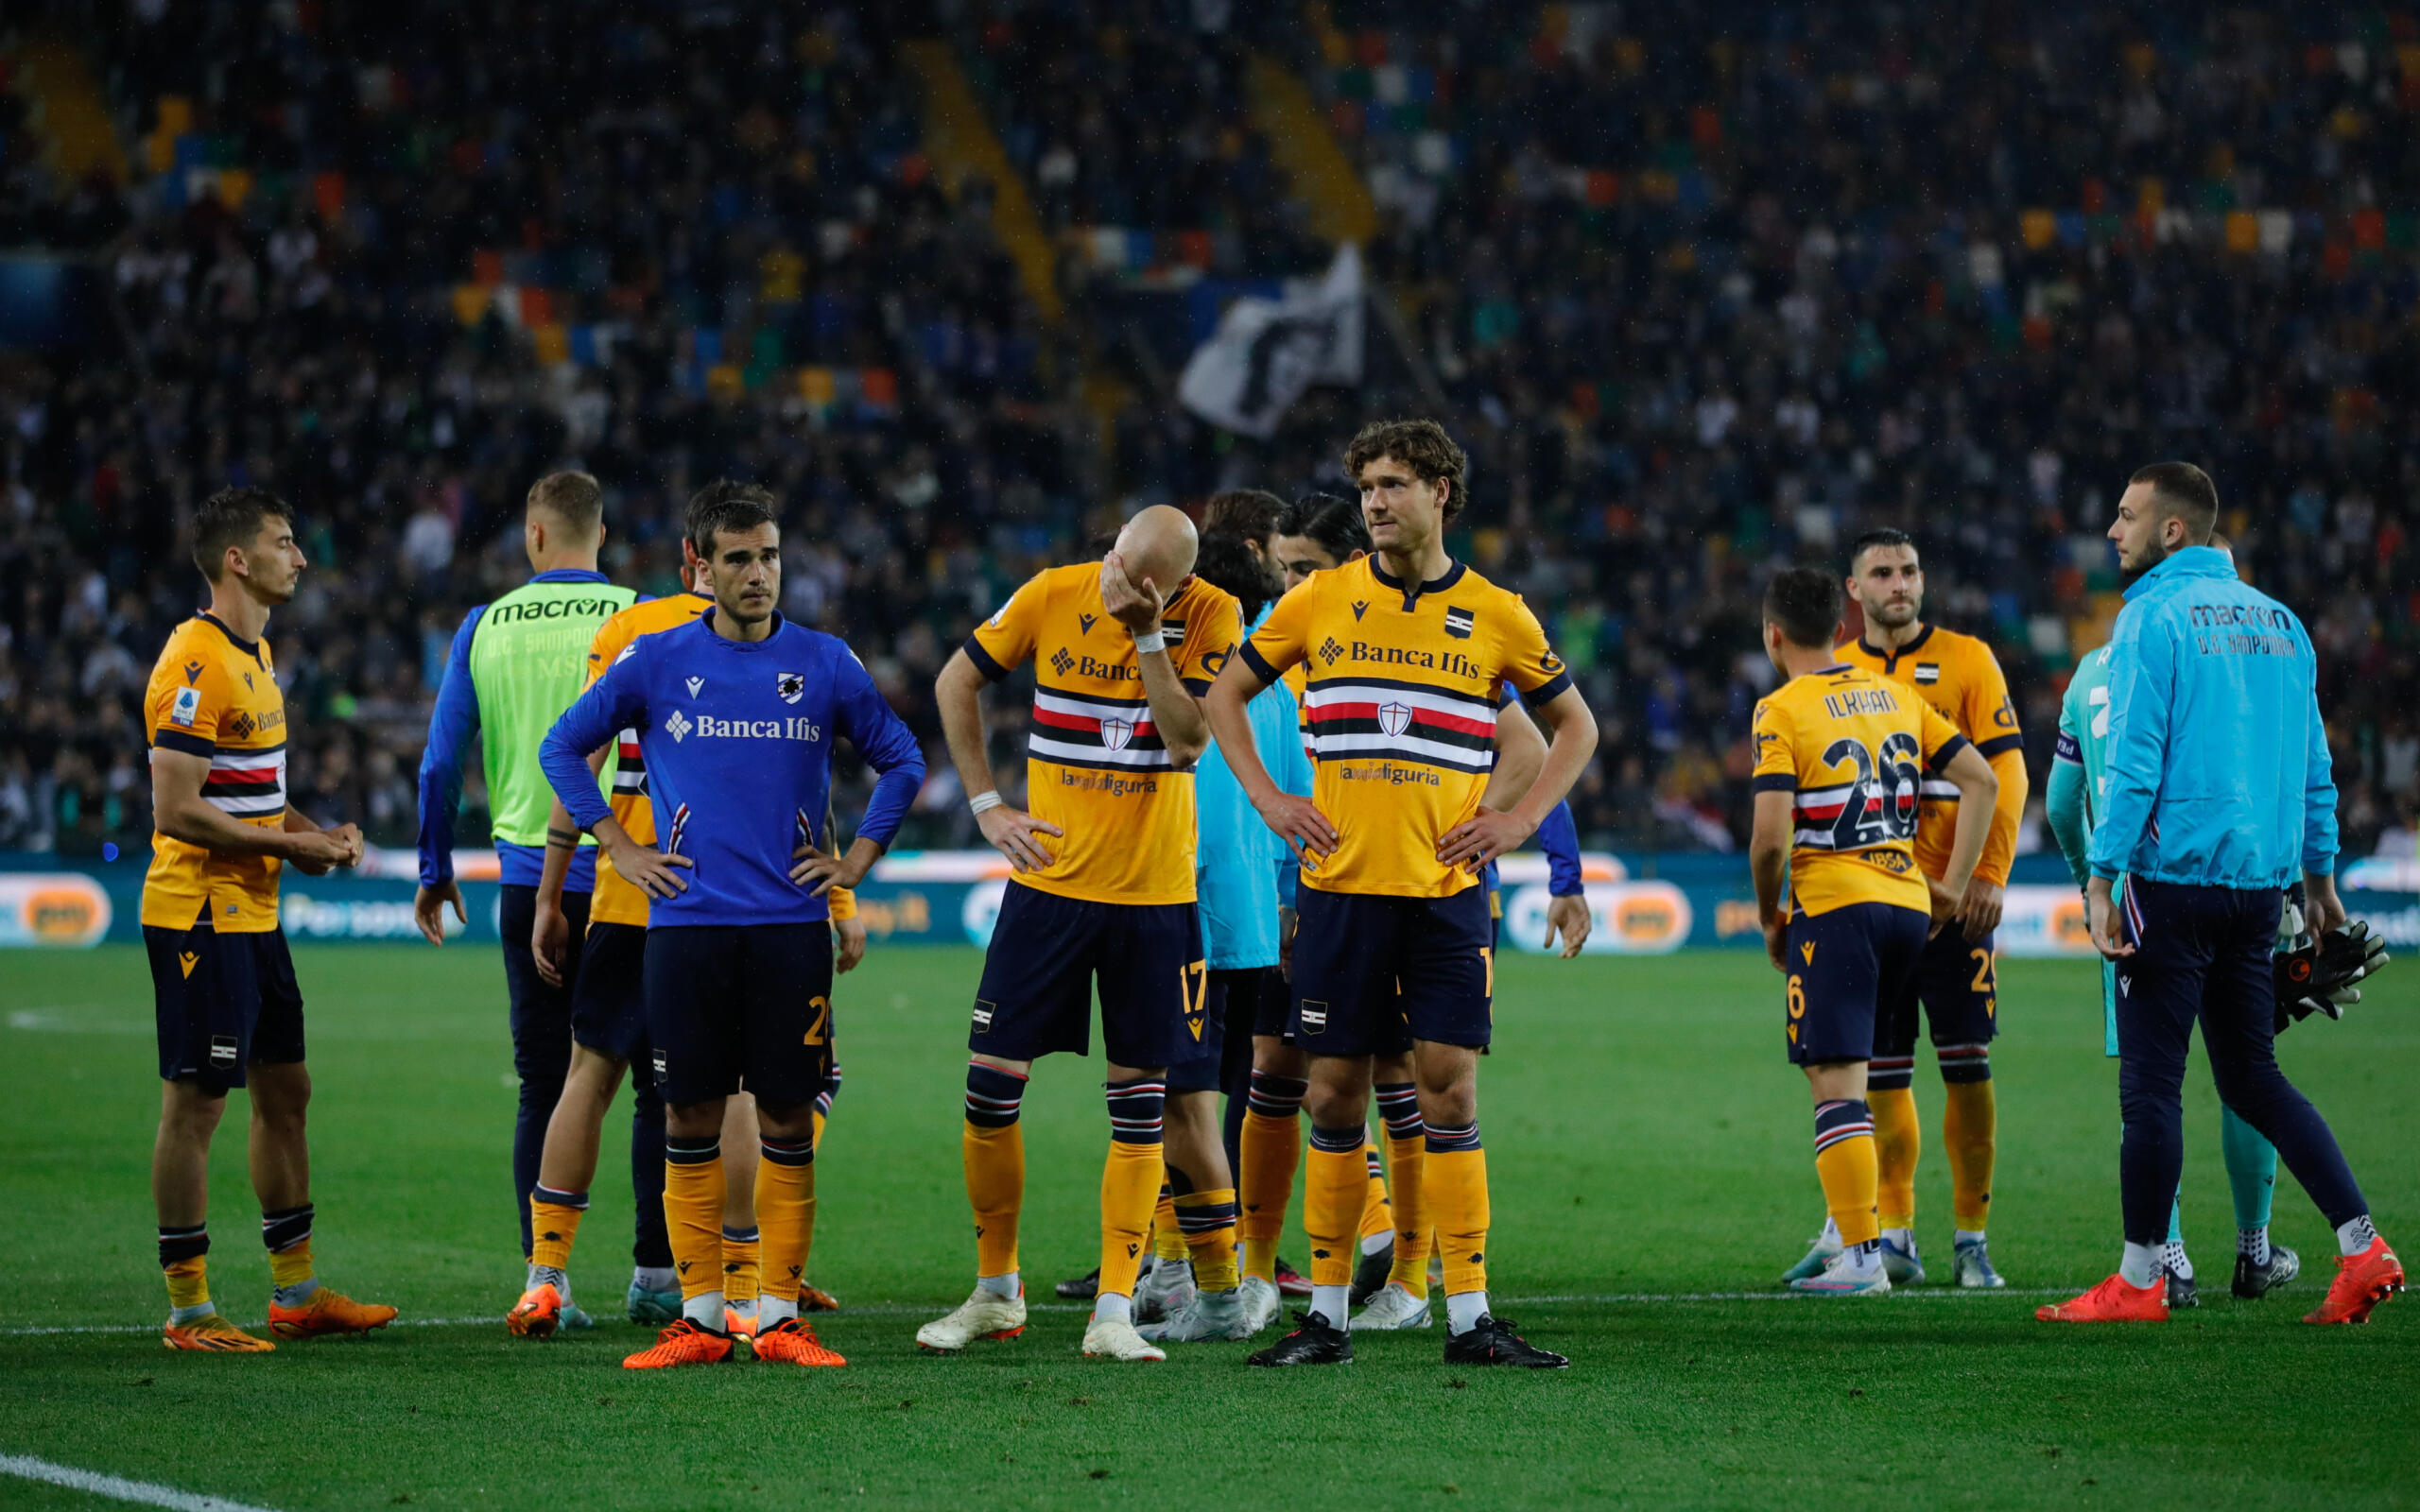 Sampdoria have formally bid farewell to Serie A after 12 years following the 0-2 loss to Udinese Monday night. They have collected just 17 points.